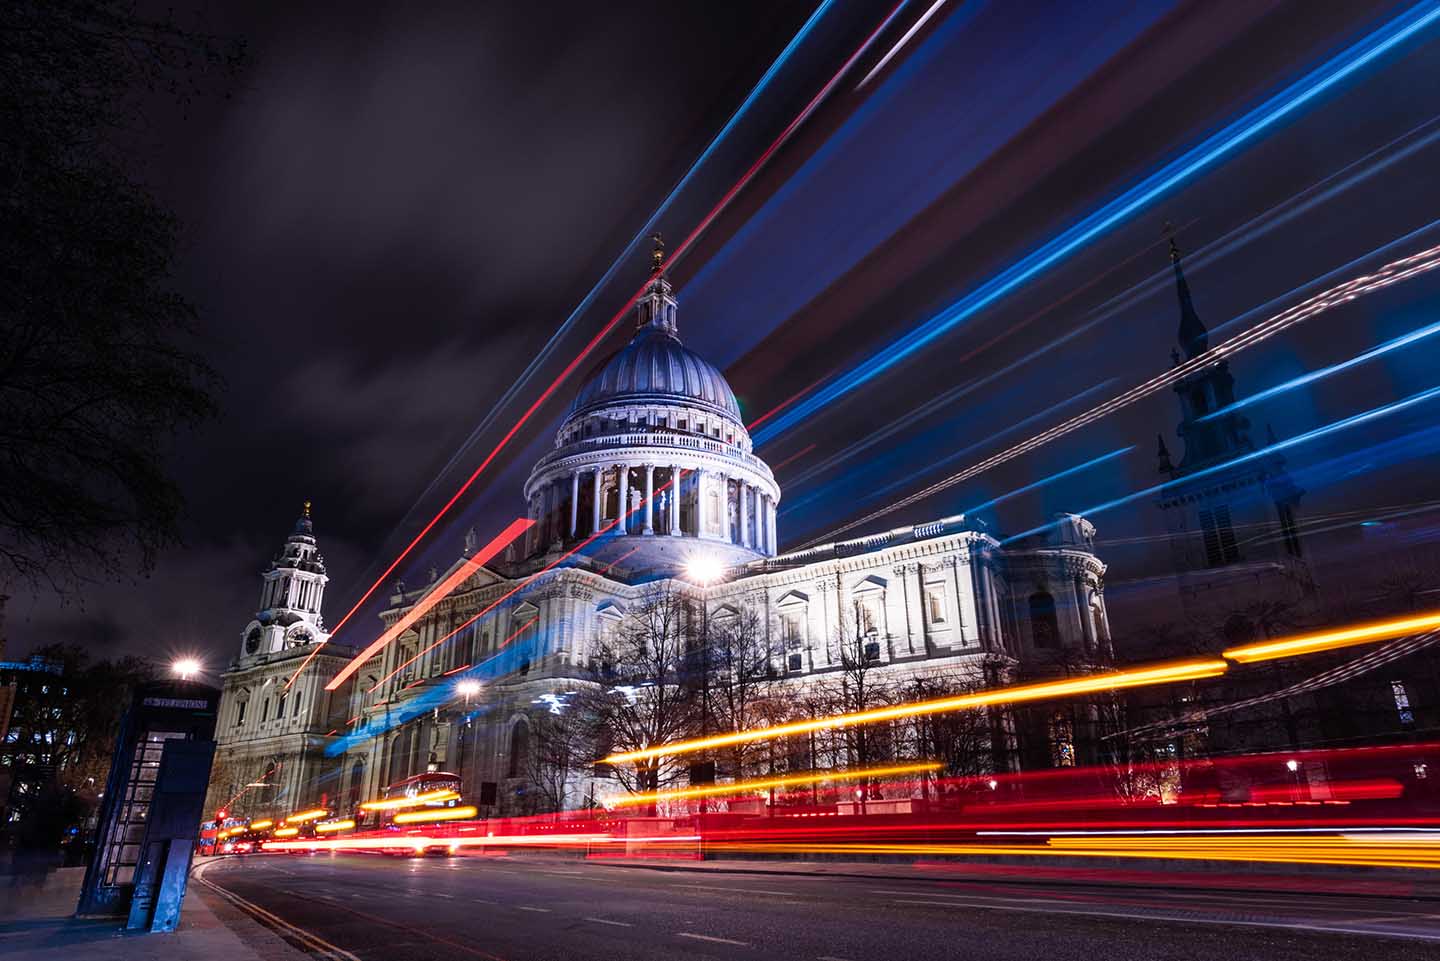 How to use Bulb mode on your camera for stunning long exposures ...